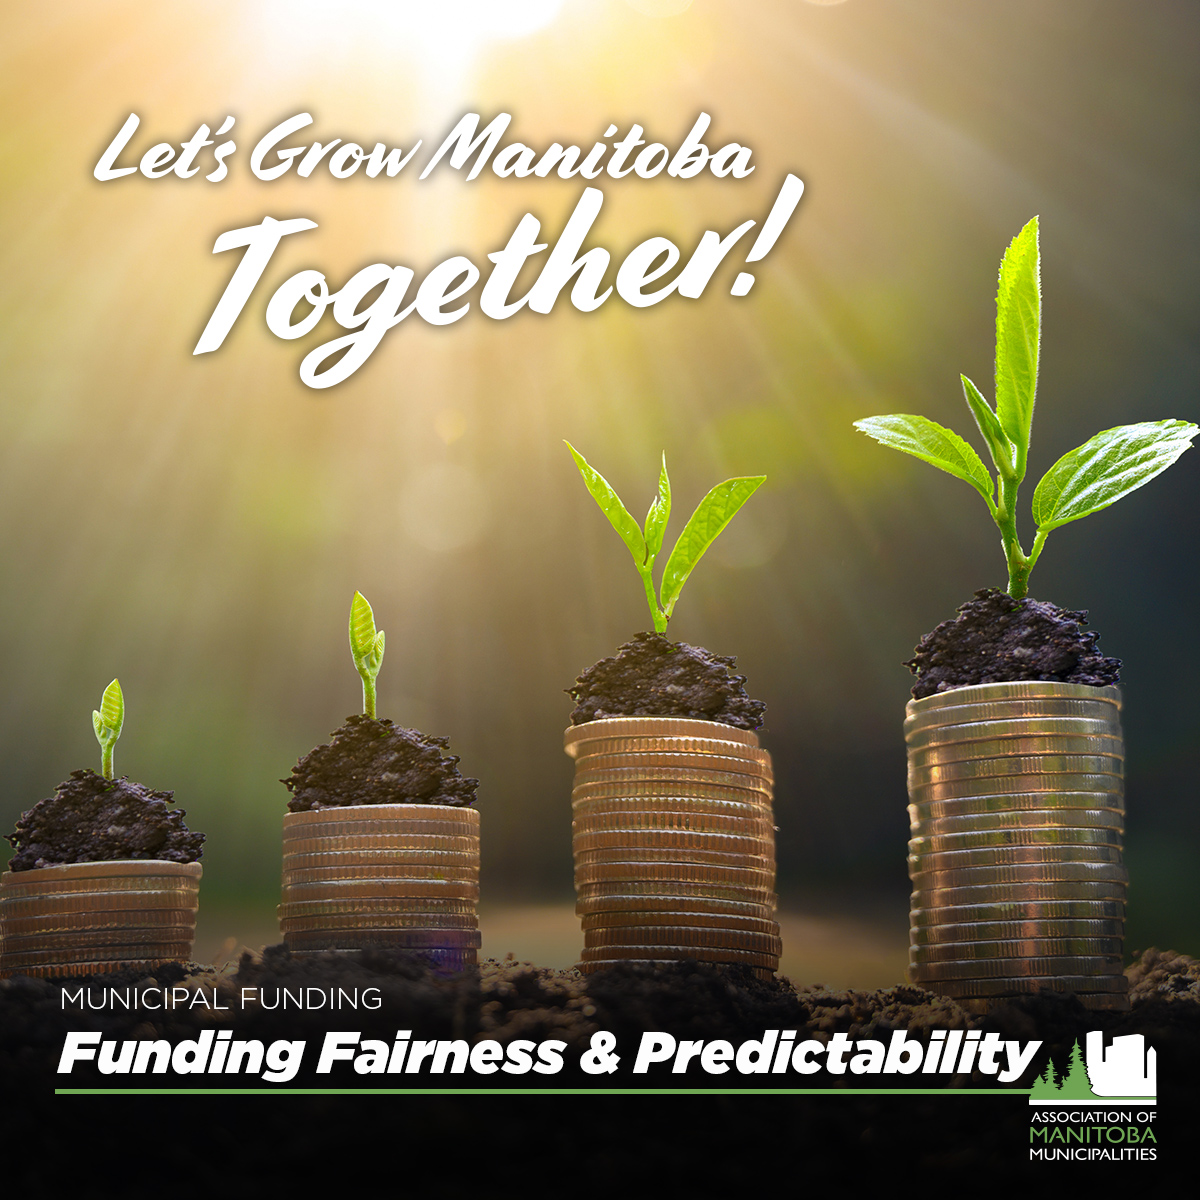 Municipalities need a predictable funding formula with an annual escalator. We also need a sales tax rebate like the one Ottawa offers, and greater flexibility and financial autonomy. Find out more: amm.mb.ca/election-2023   @AMMManitoba  #mbelection2023 #letsgrowmbtogether